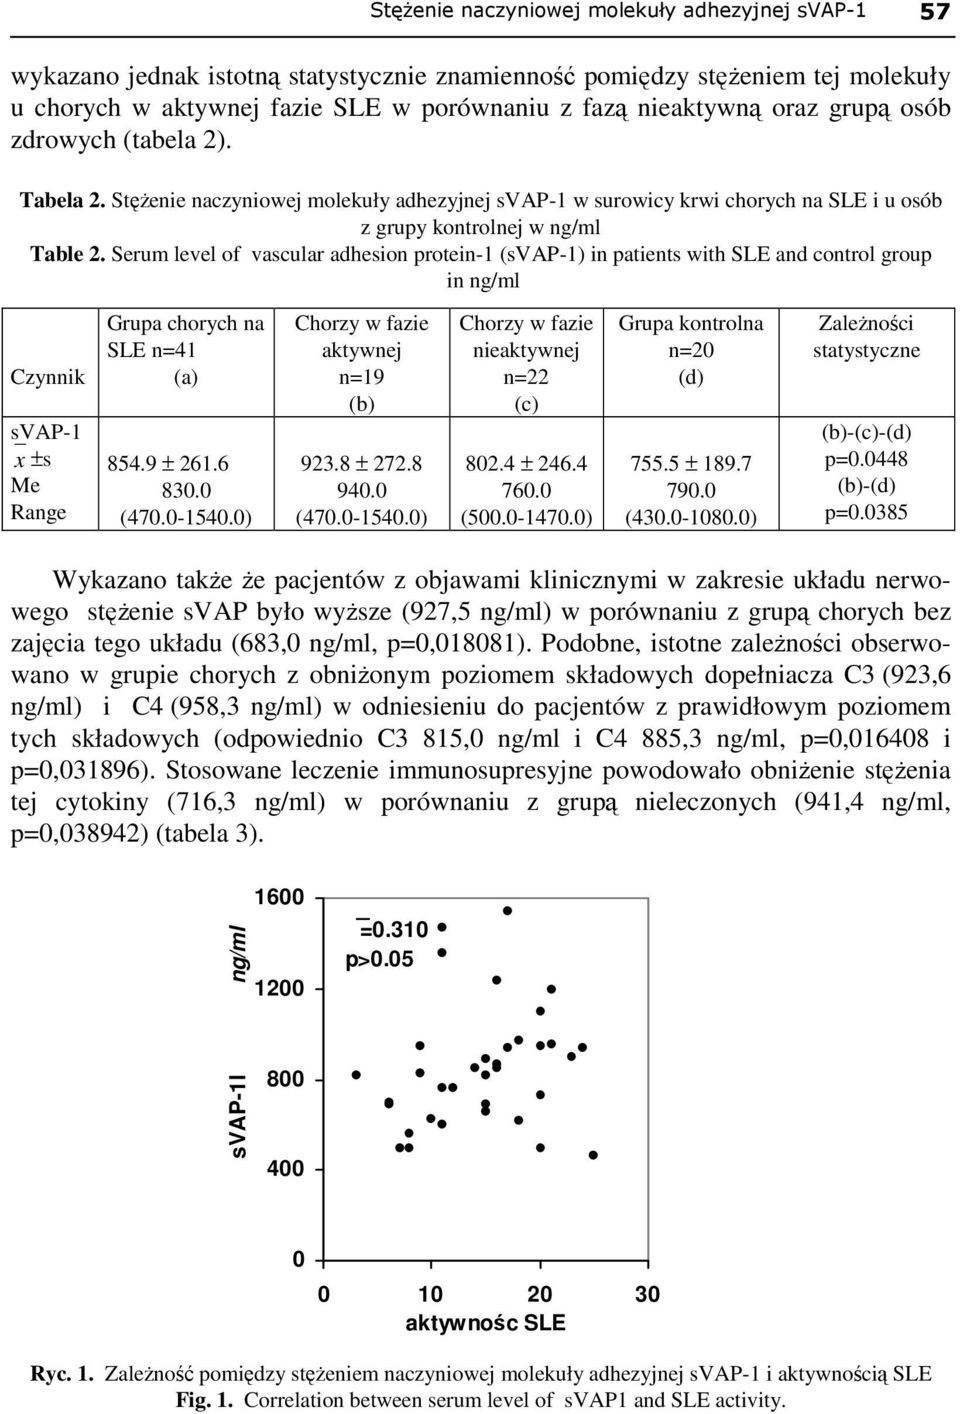 Serum level of vascular adhesion protein-1 (svap-1) in patients with SLE and control group in ng/ml Czynnik svap-1 Range Grupa chorych na SLE n=41 (a) 854.9 ± 261.6 830.